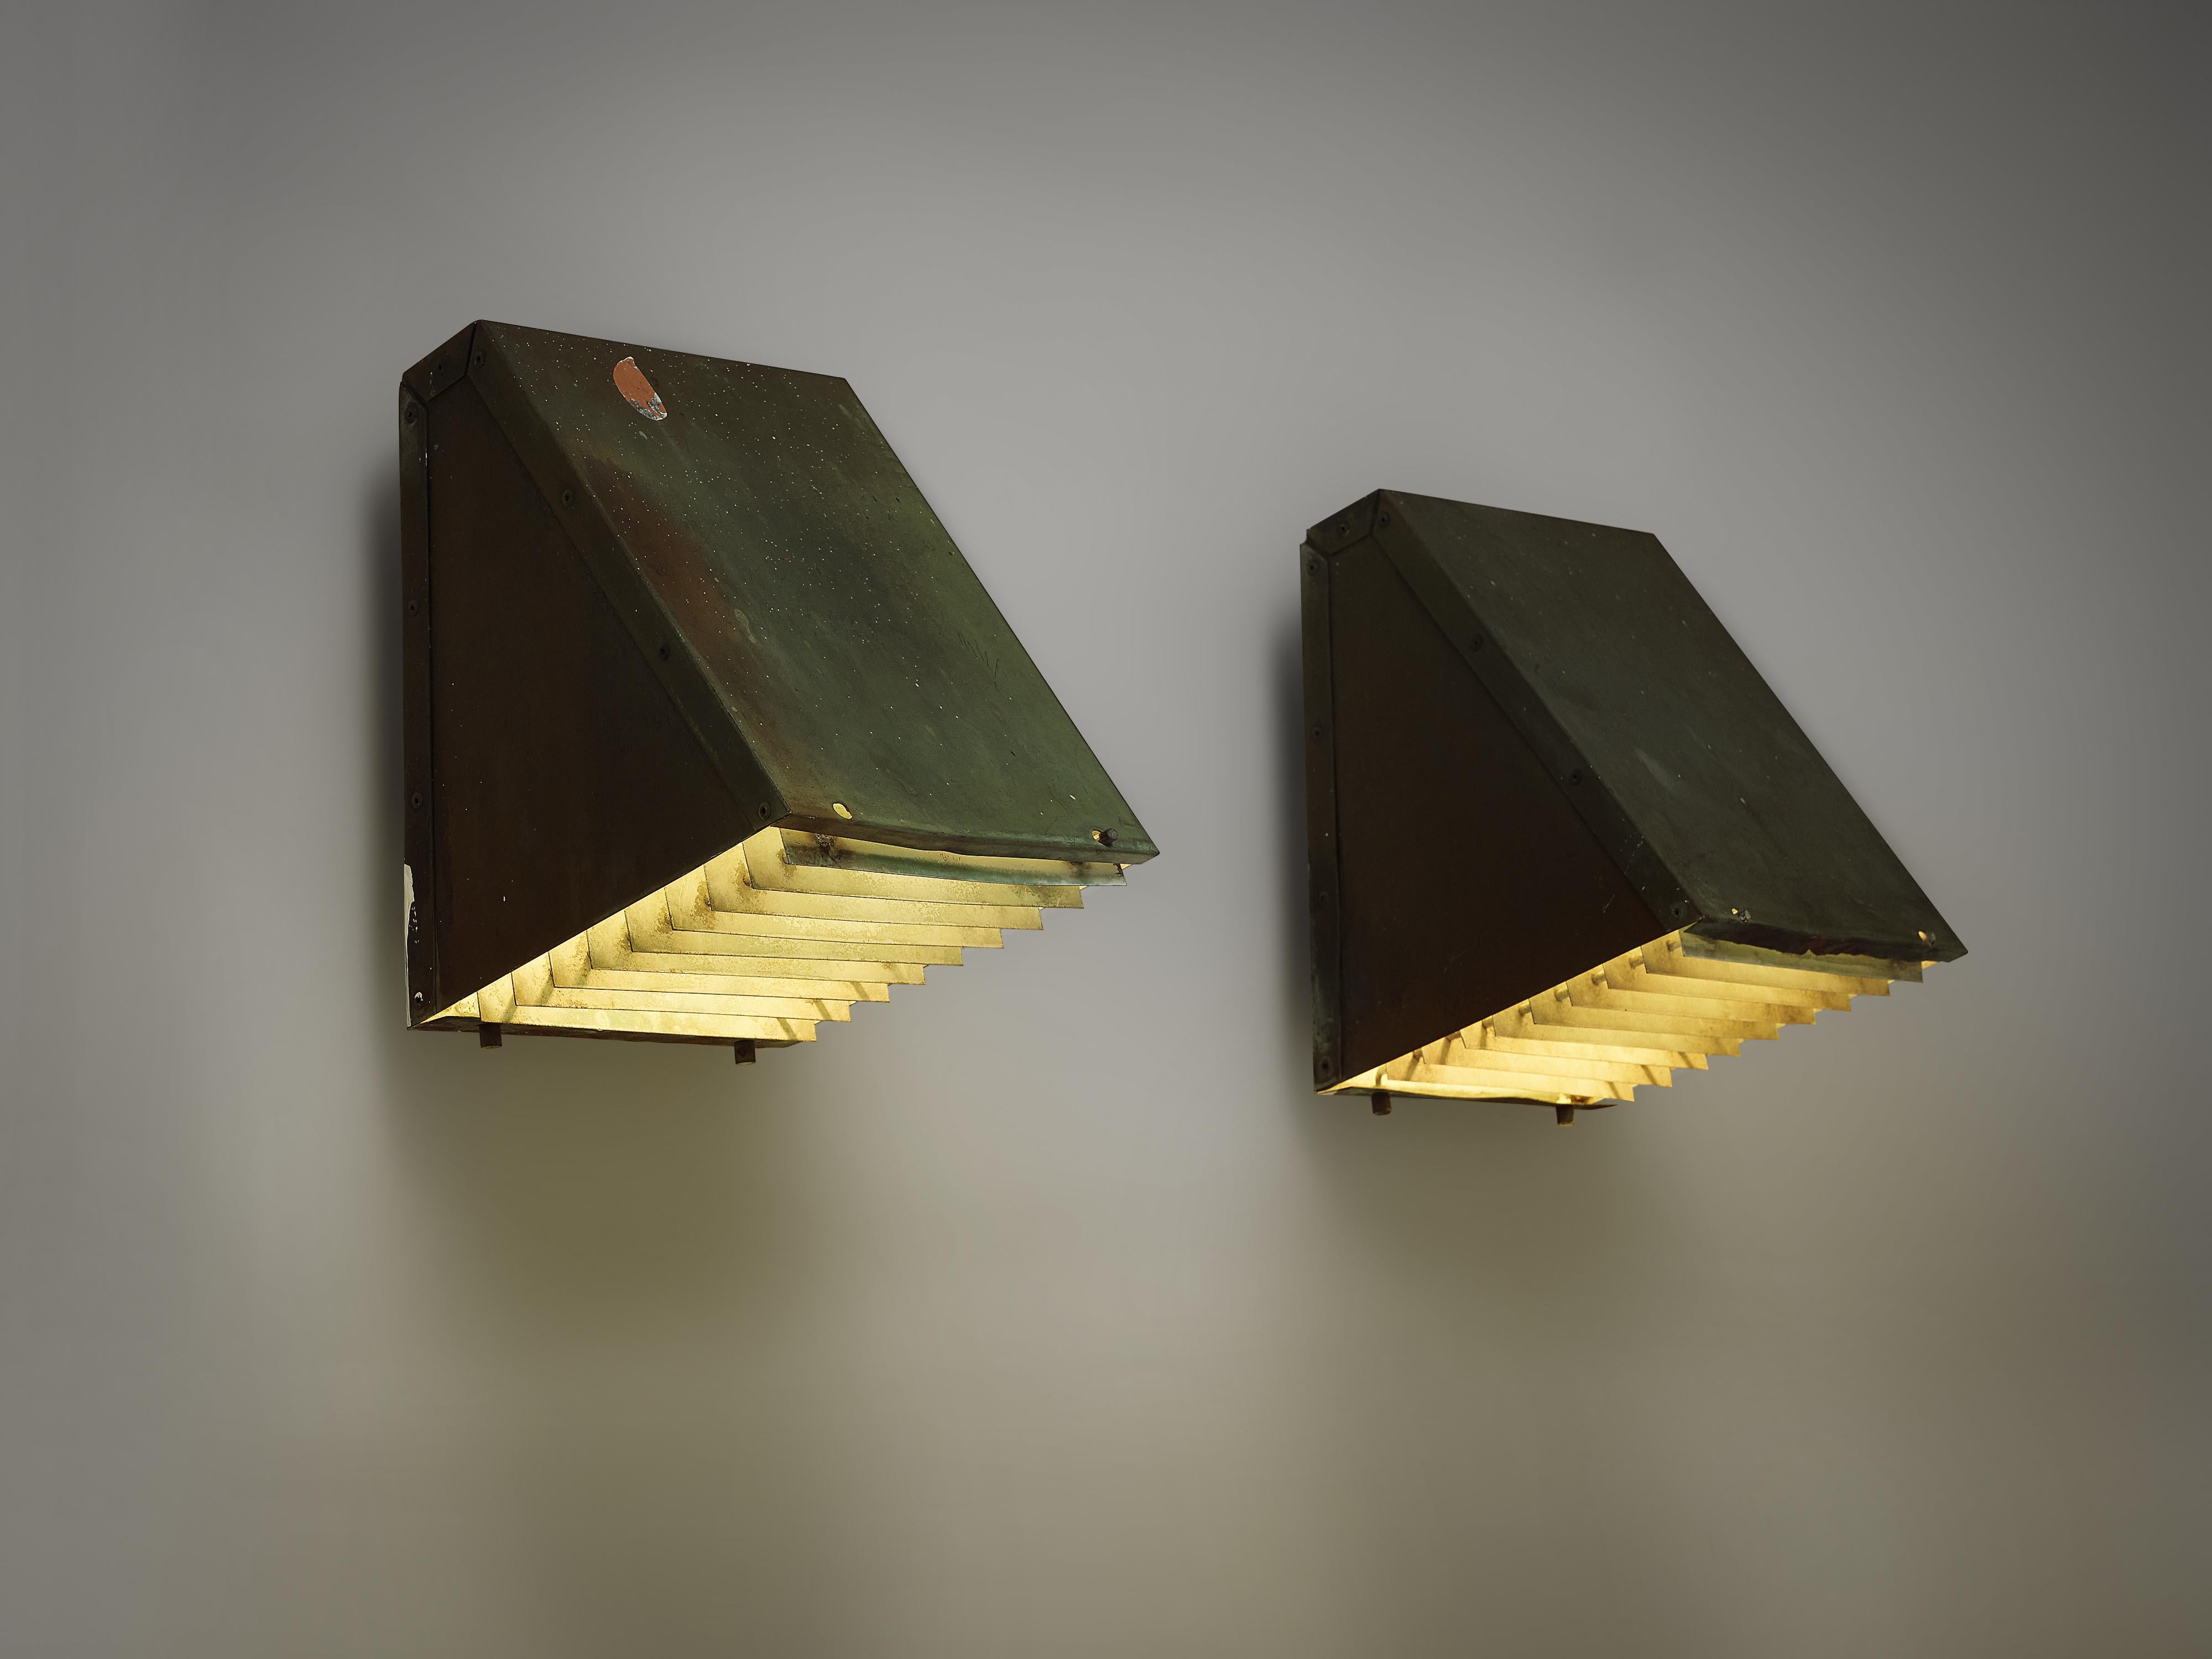 Wall lights, copper, Sweden, 1960s

These wall lights are executed in patinated copper. The light, that is reflected by the patinated copper creates a beautiful atmosphere. The straight shape of the lamps, create a sleek design. These lights owe